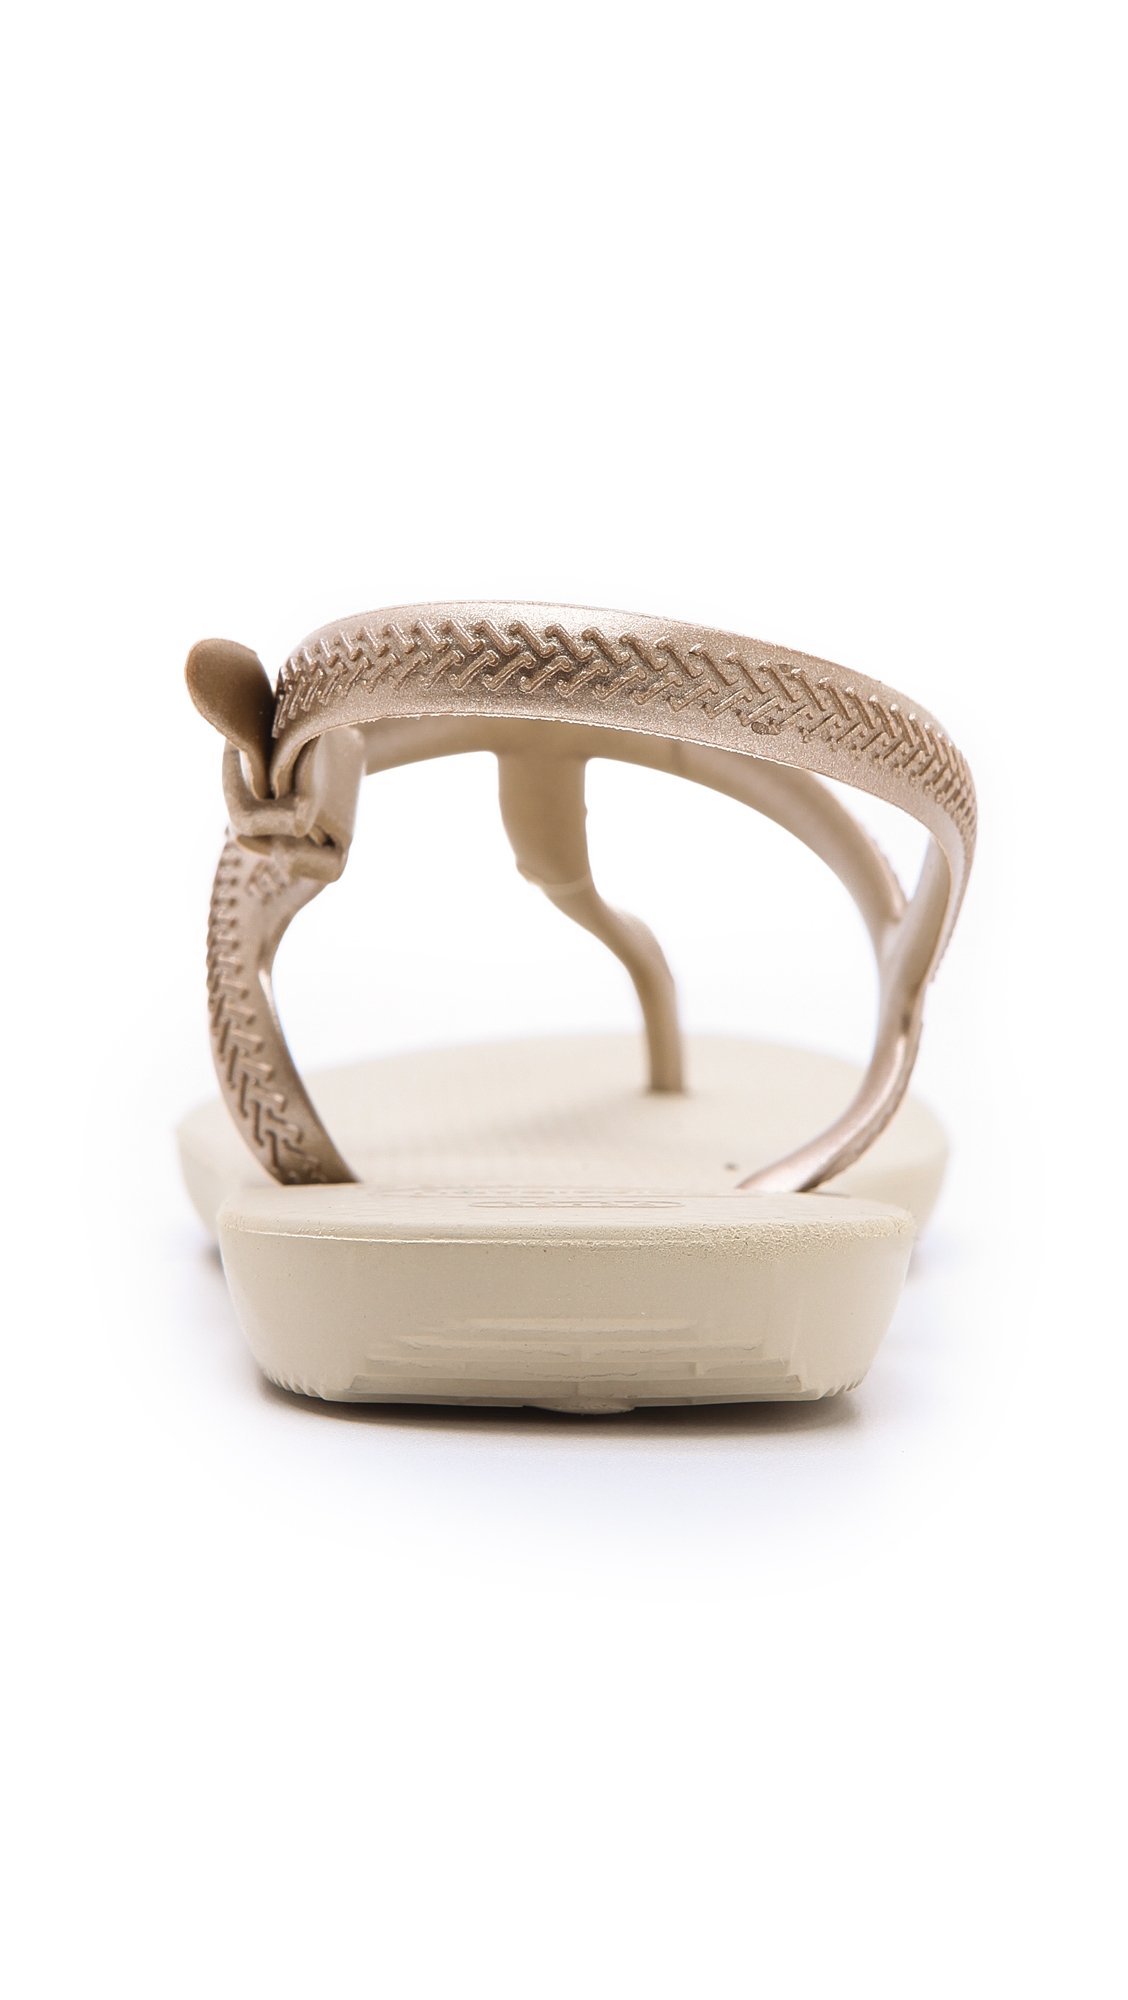 Havaianas Freedom T Strap Sandals in Sand Grey/Light Golden (Natural ...